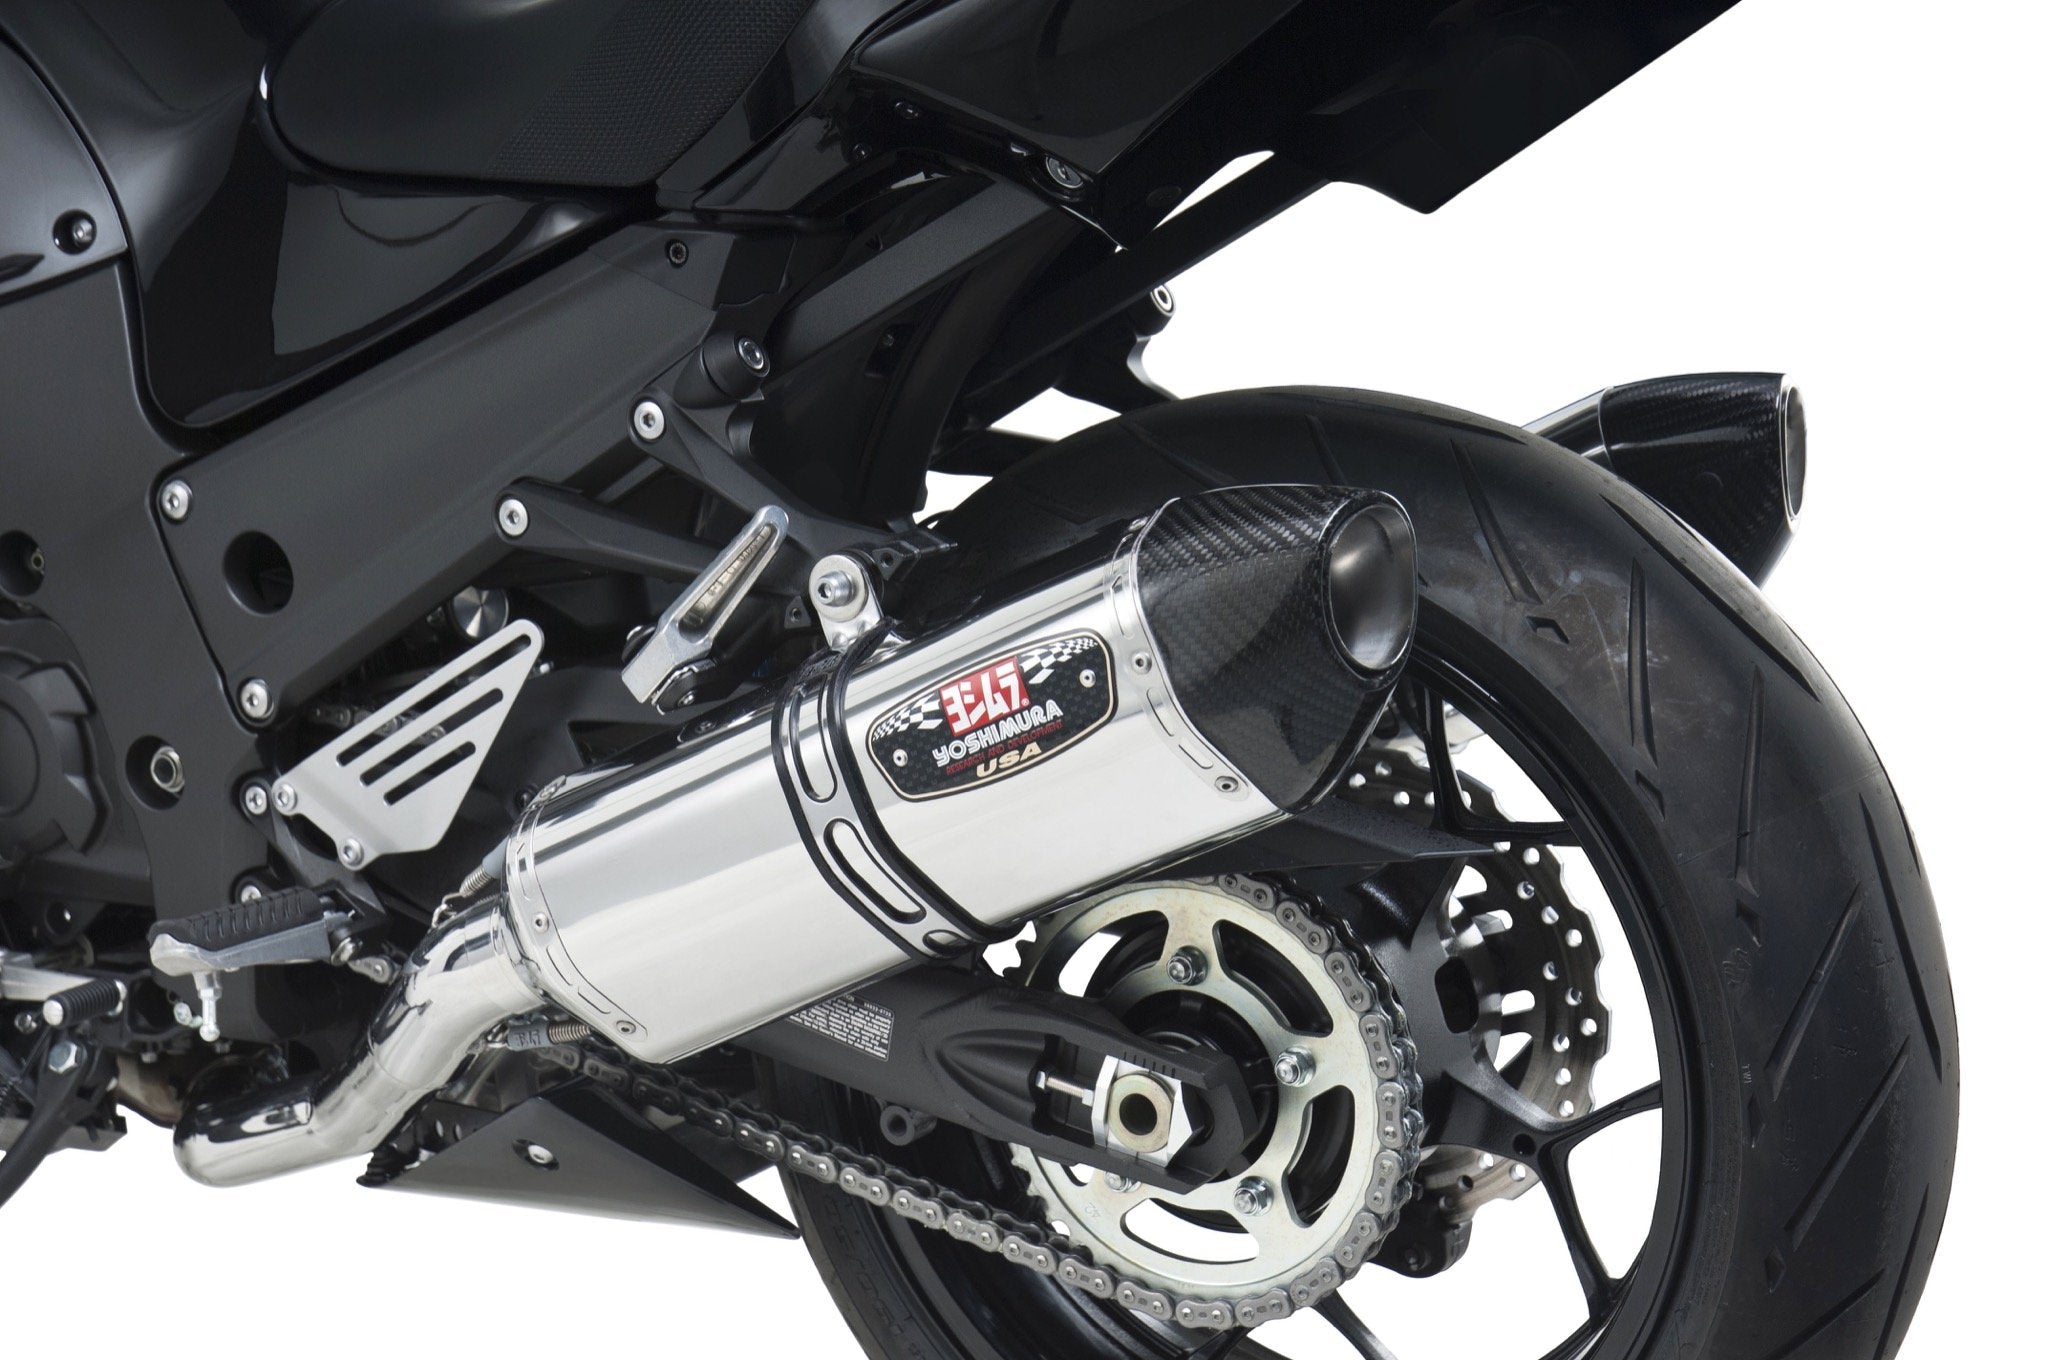 Yoshimura Zx-14r 12-22 Race R-77 Stainless Slip-On Exhaust, W/ Stainless Mufflers